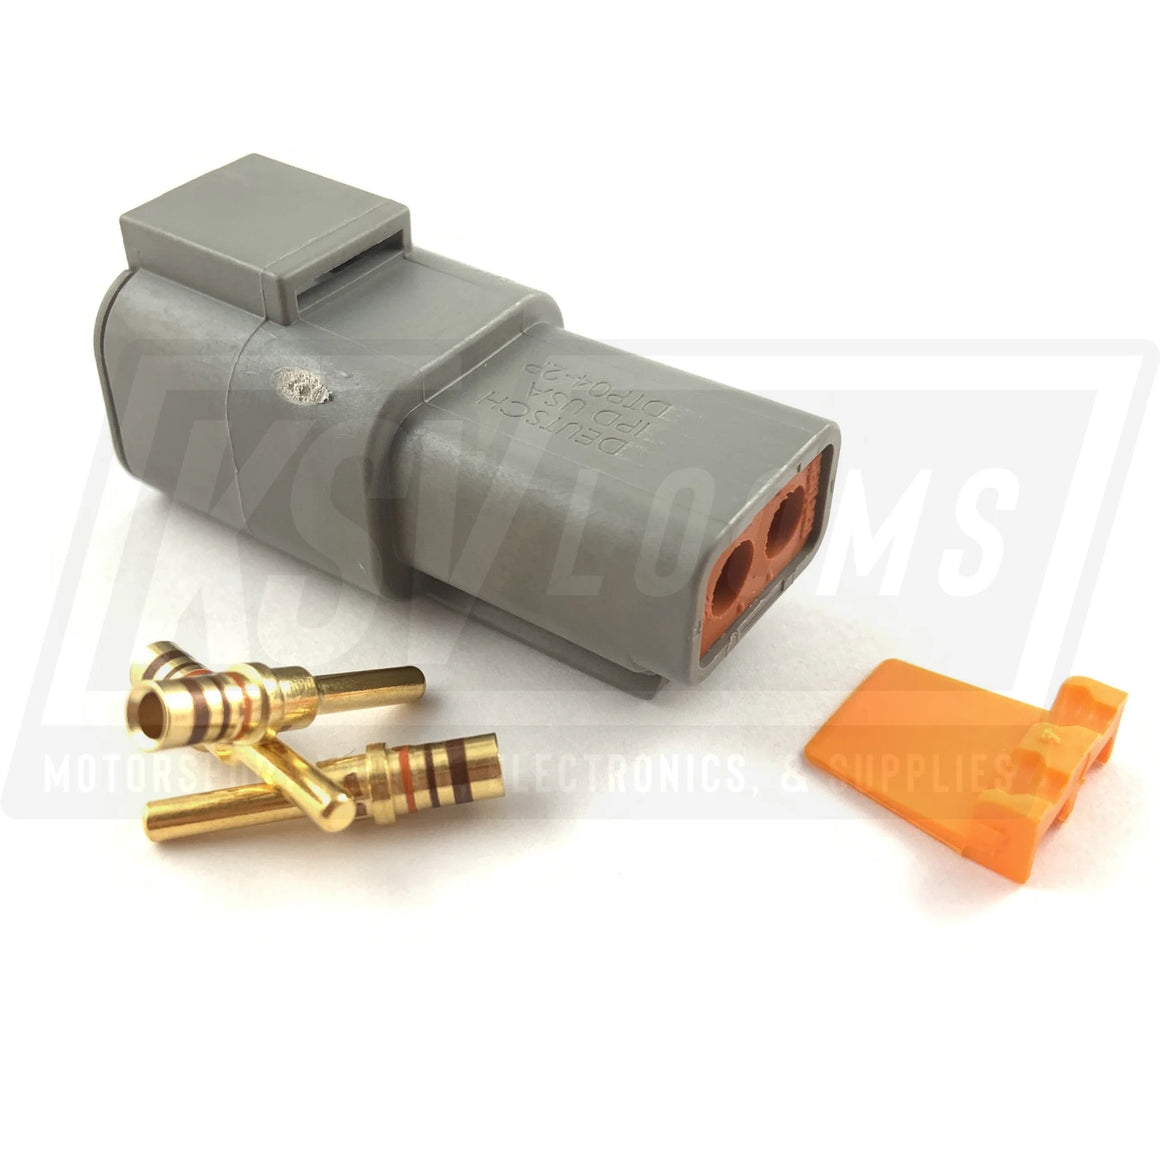 Deutsch Dtp 2-Way Pin Receptacle Connector Kit (14-12 Awg Gold Contacts)